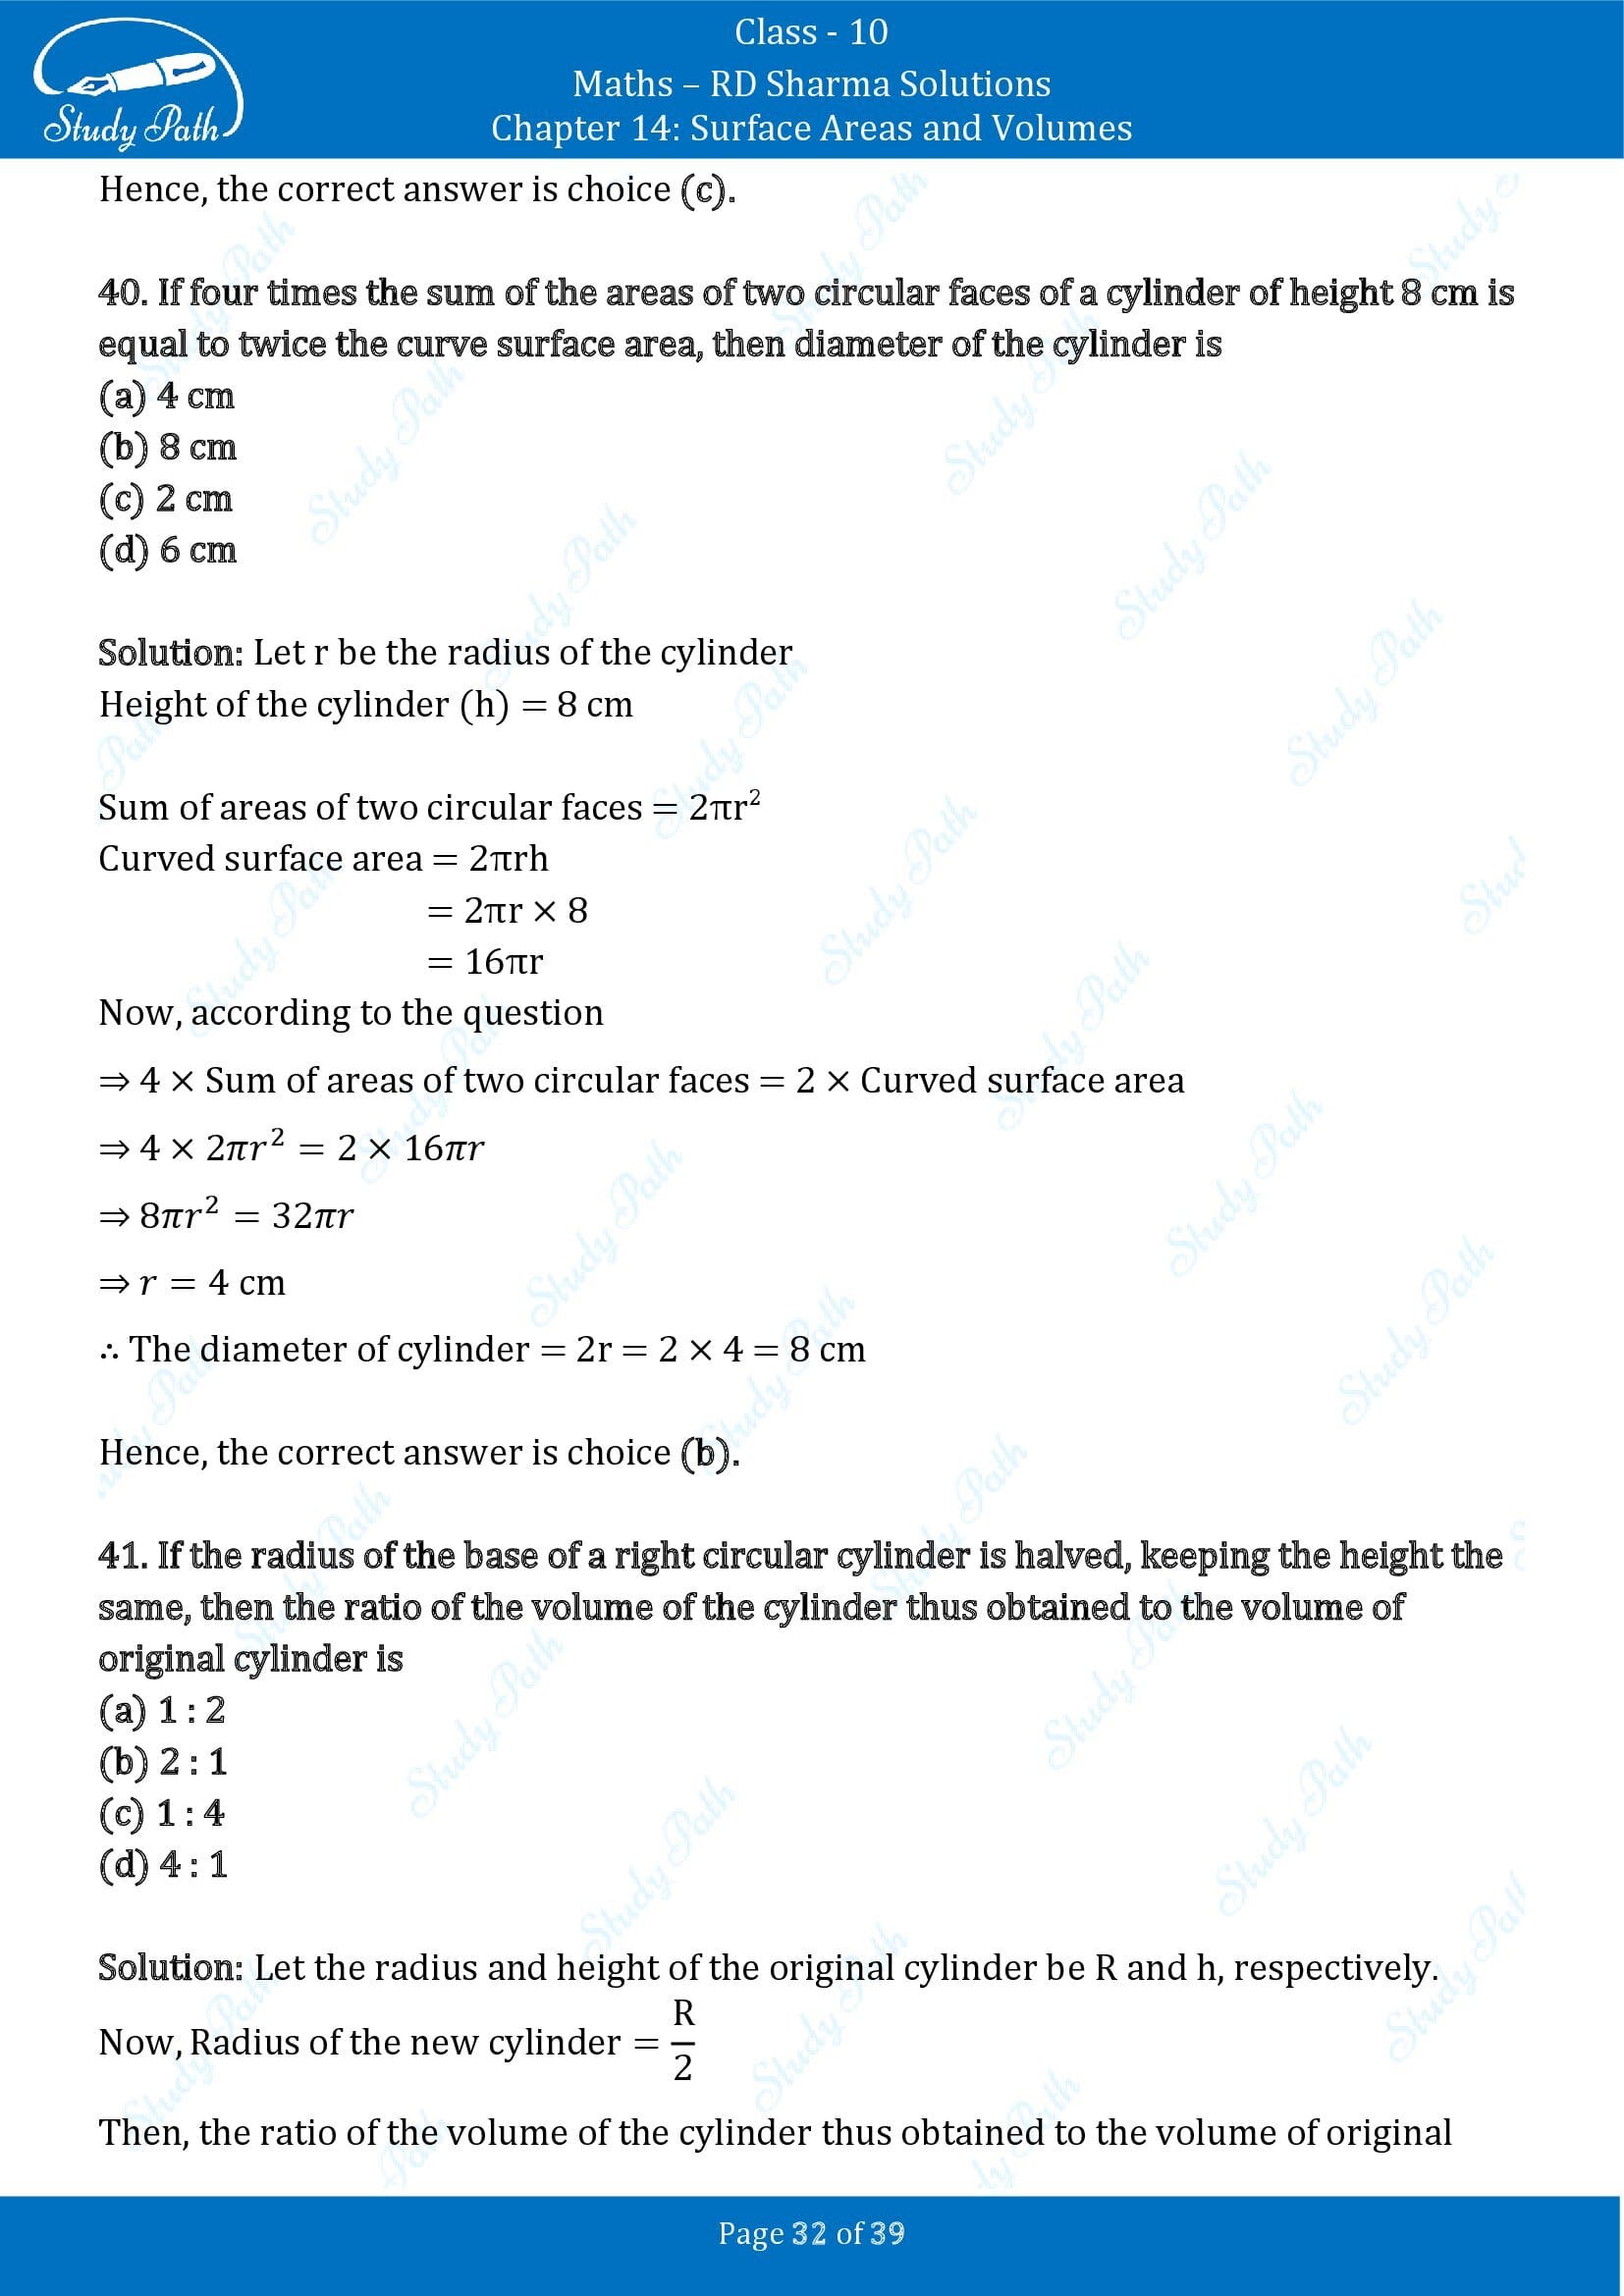 RD Sharma Solutions Class 10 Chapter 14 Surface Areas and Volumes Multiple Choice Question MCQs 00032